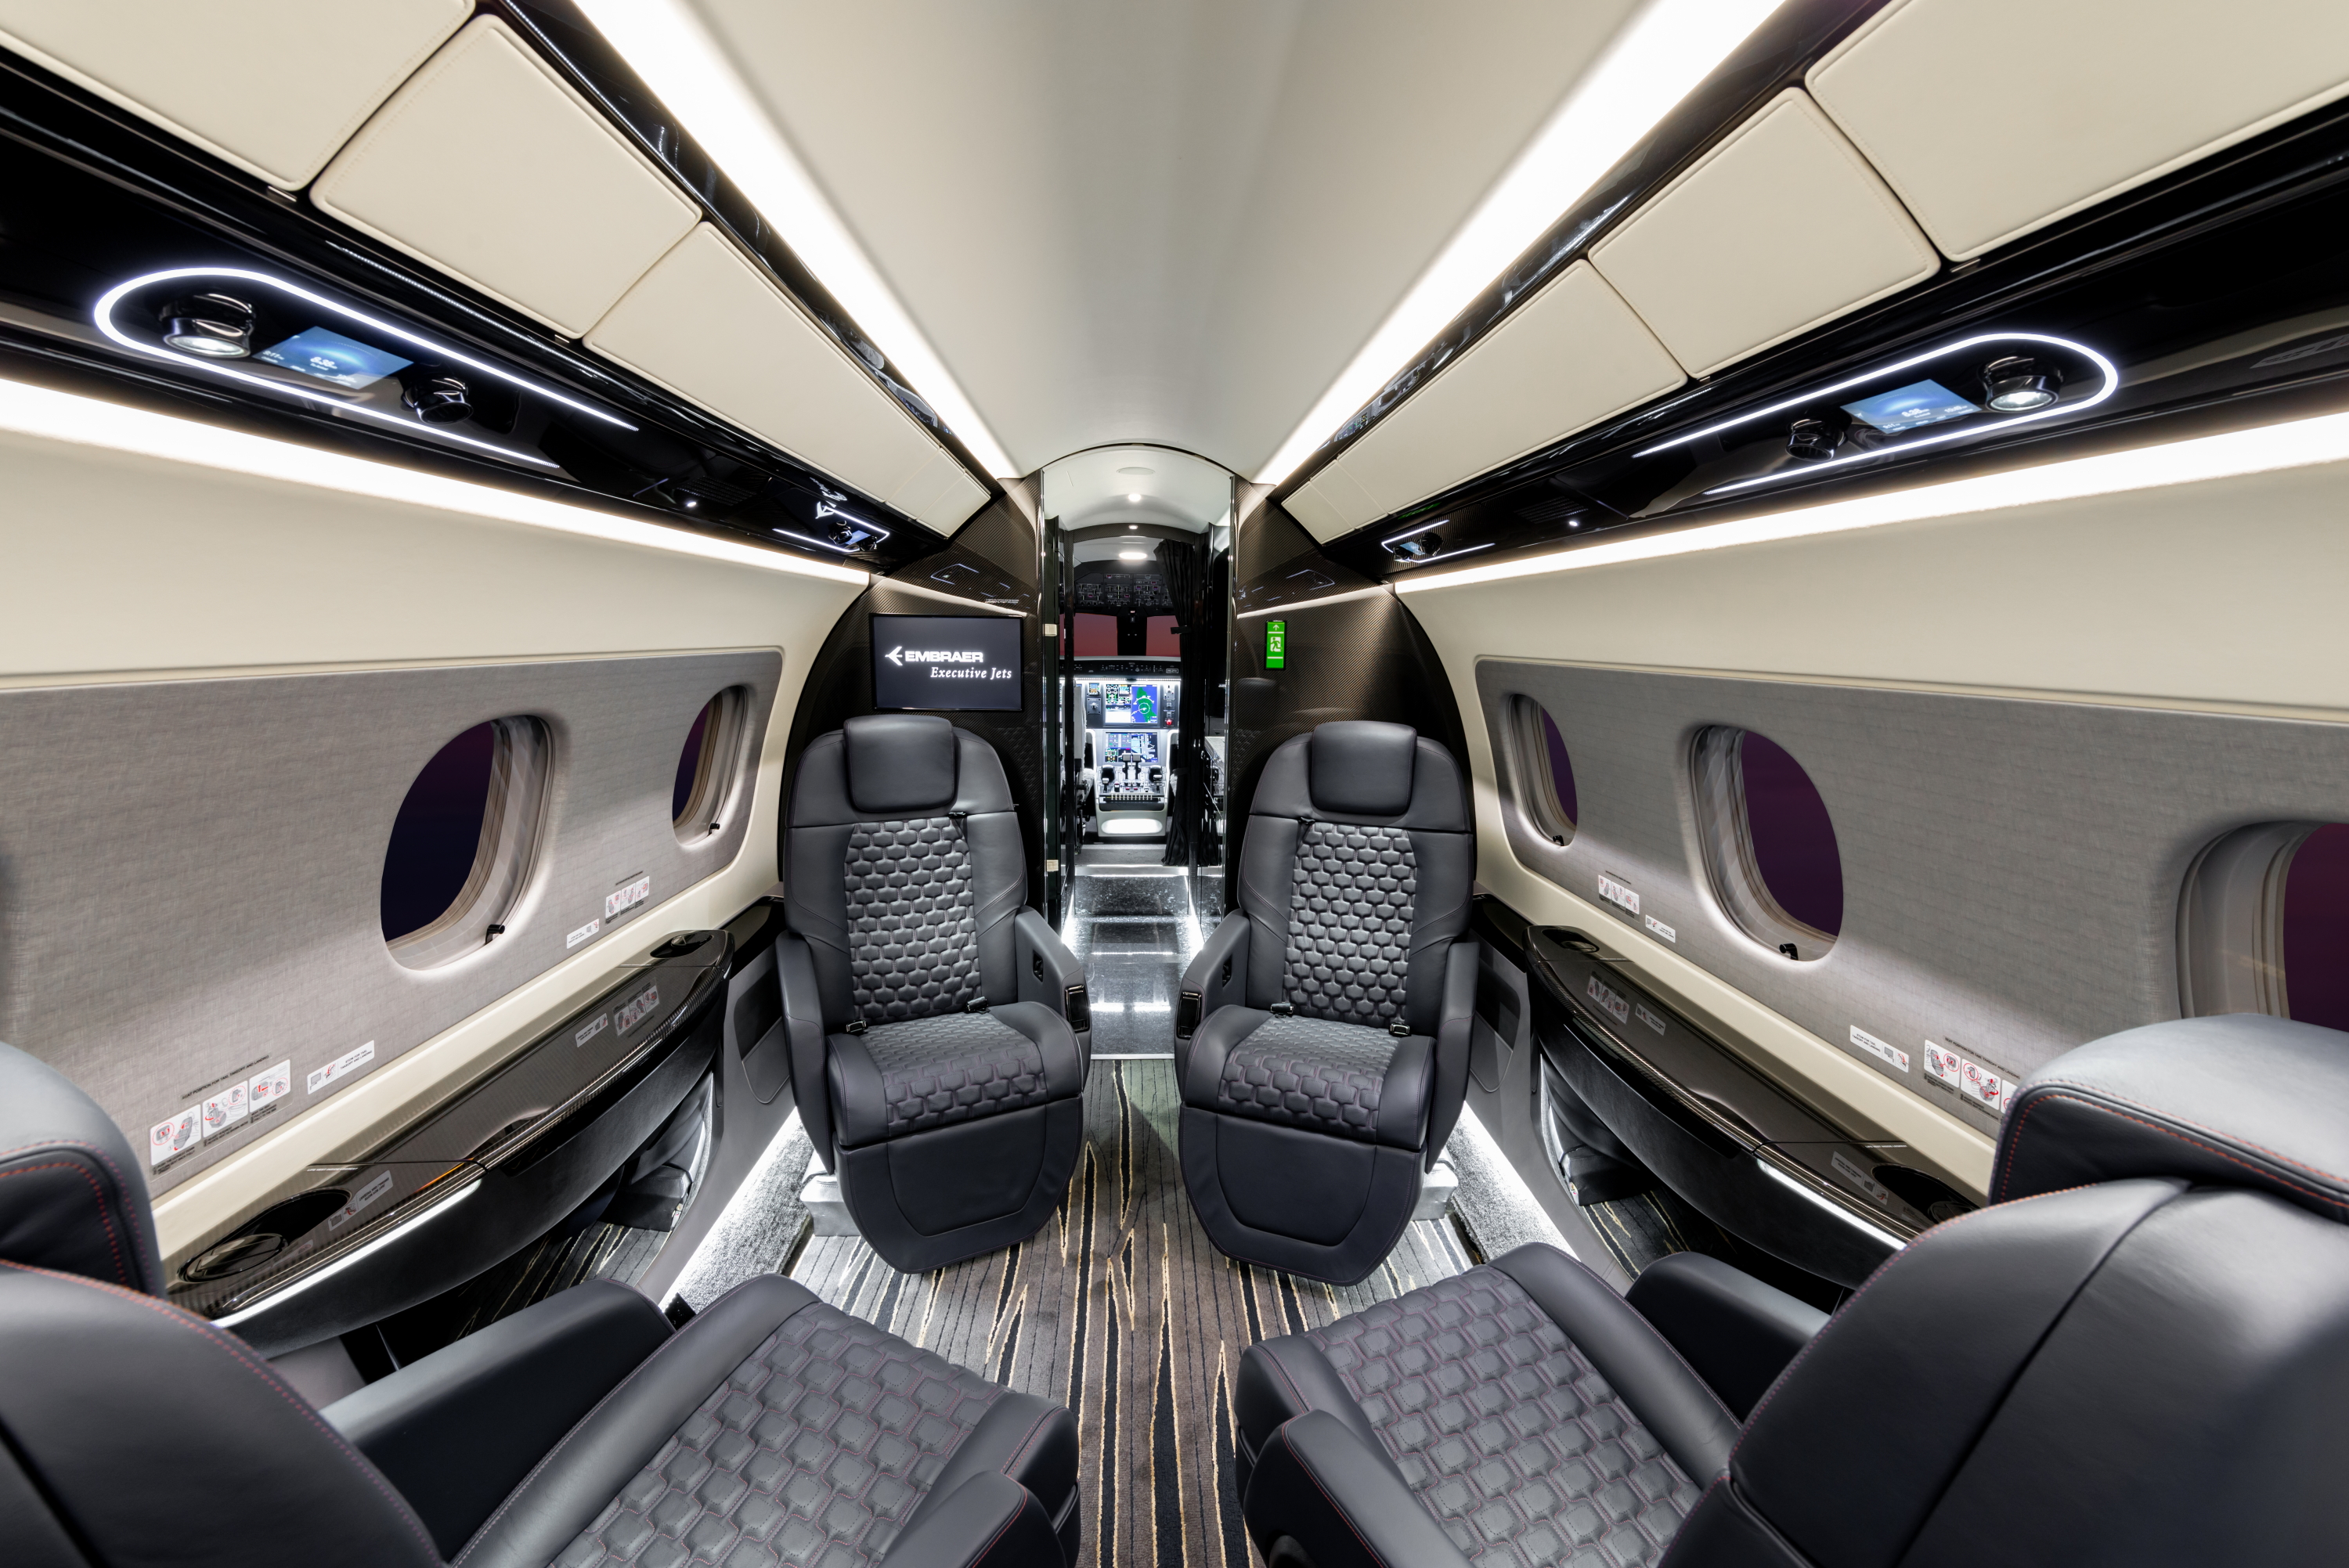 The Embraer DNA Design interior features a six-foot-tall, flat-floor cabin, stone flooring and a vacuum service lavatory. In addition to the full-service galley and a wardrobe, eight fully reclining club seats can be berthed into four beds, and the baggage space is among the largest in its class. Click to enlarge.